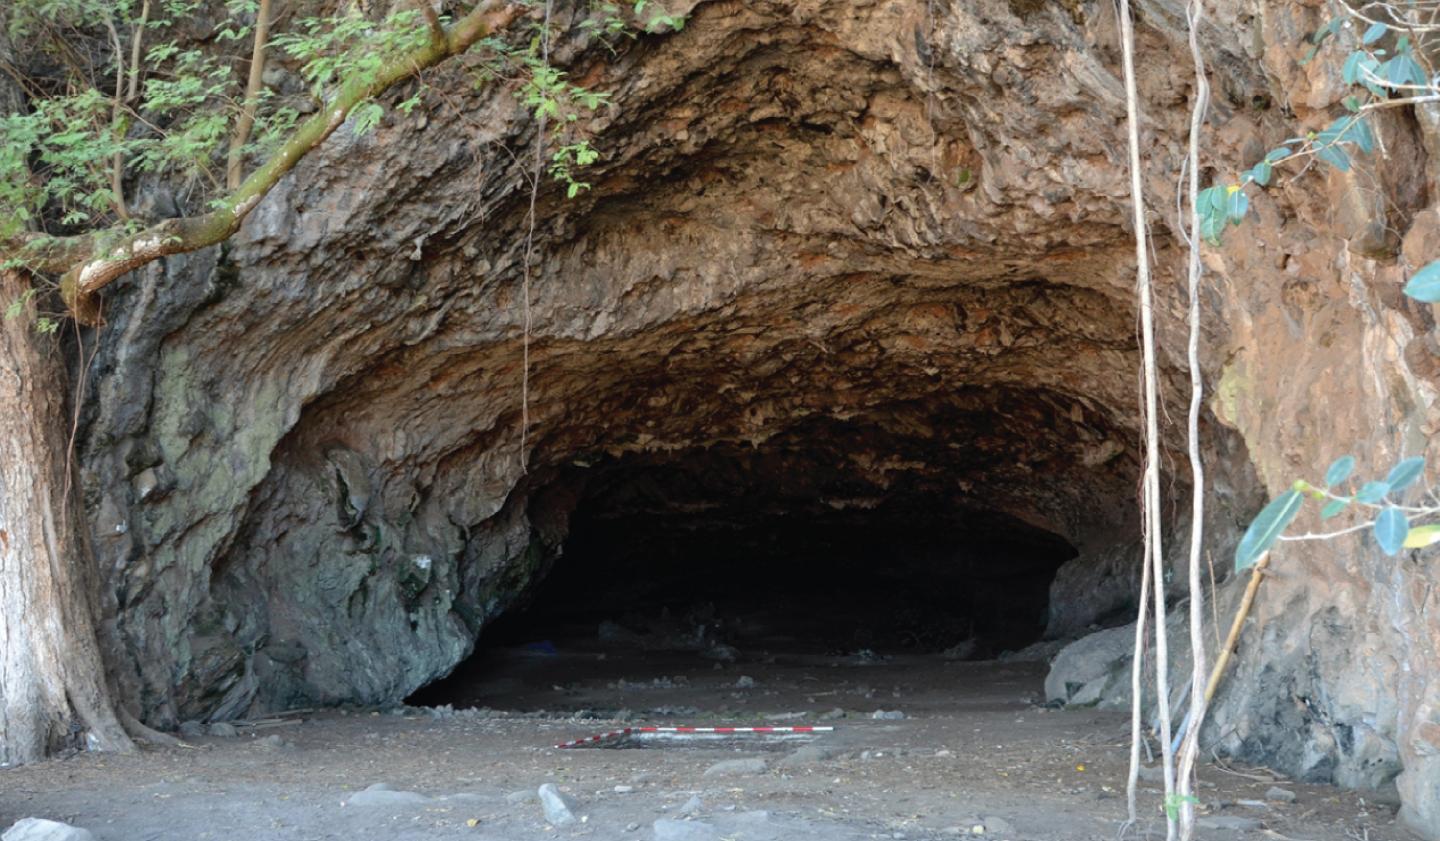 Entrance to Makpan cave, Alor Island, where the burial was discovered